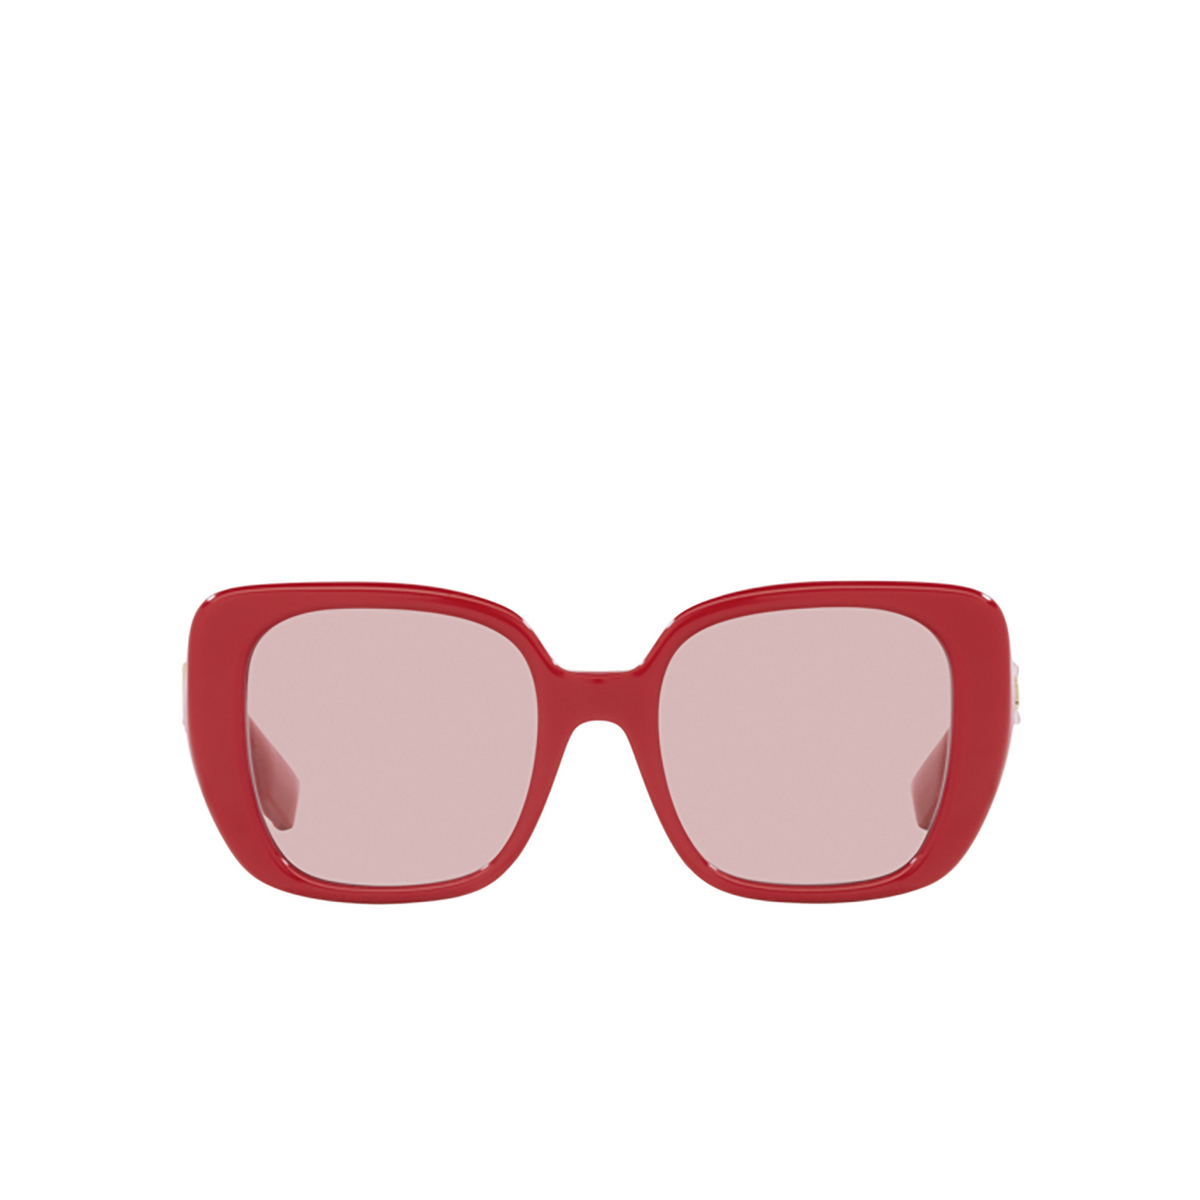 Burberry HELENA Sunglasses 4027/5 Red - front view